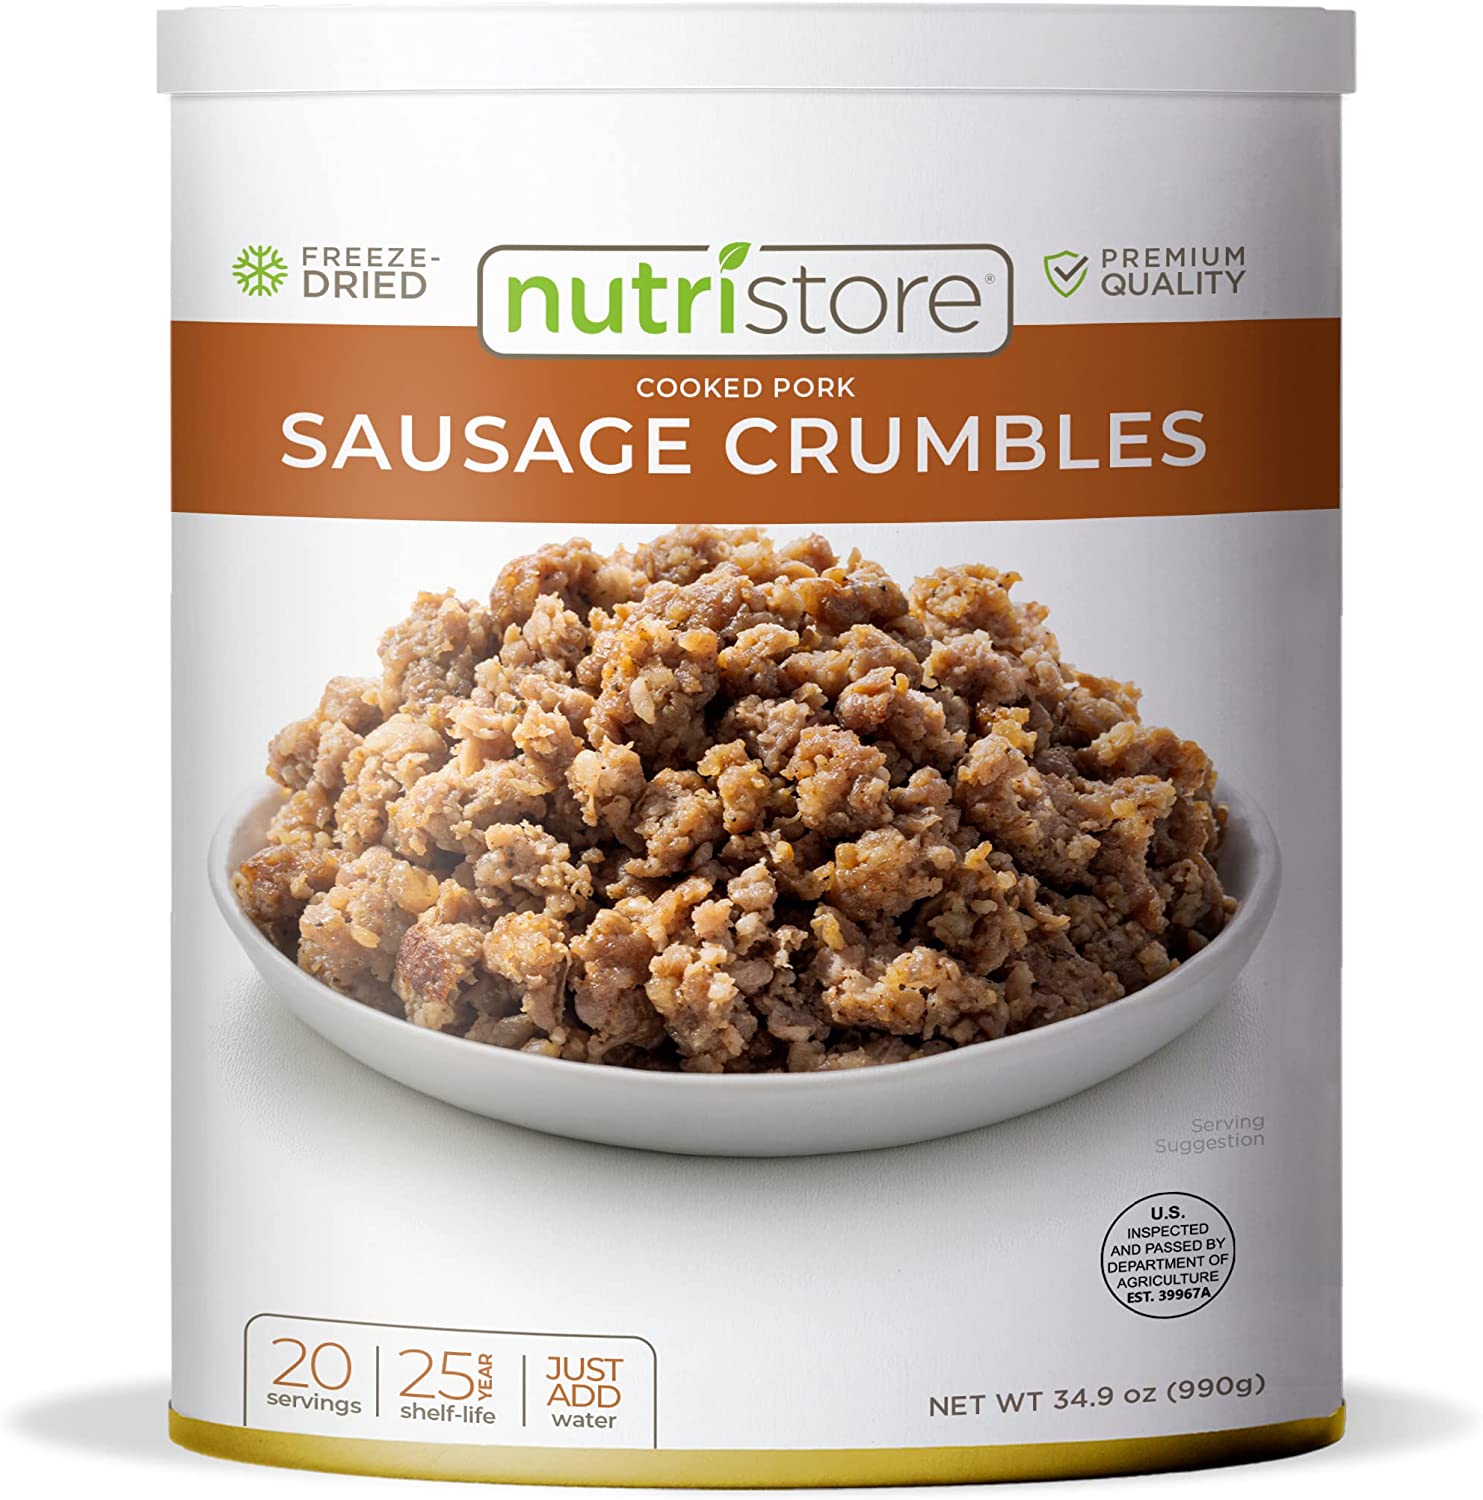 Nutristore Freeze-Dried Sausage Crumbles | Emergency Survival Bulk Food Storage | Premium Quality Meat | Perfect for Lightweight Backpacking, Camping, Home Meals | USDA Inspected | 25 Year Shelf-Life